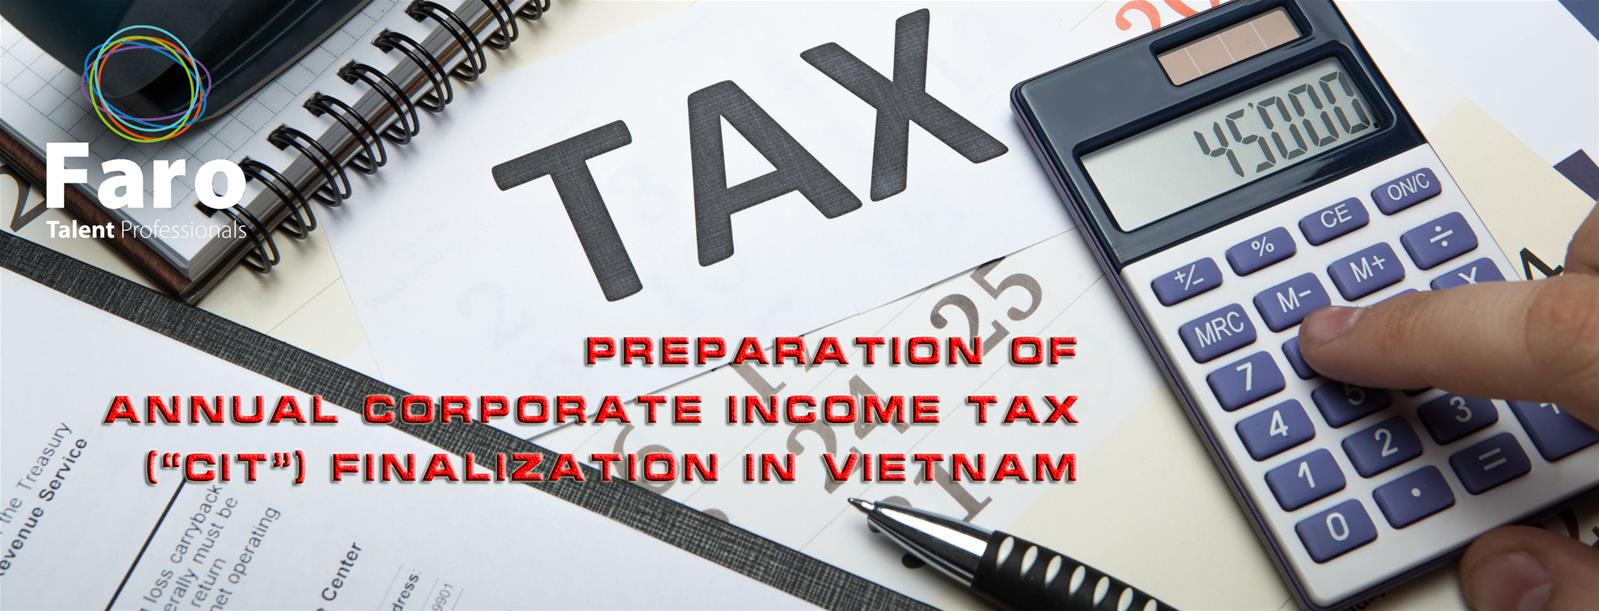 Brief Outline for Preparation of Annual Corporate Income Tax (“CIT”) Finalization in Vietnam